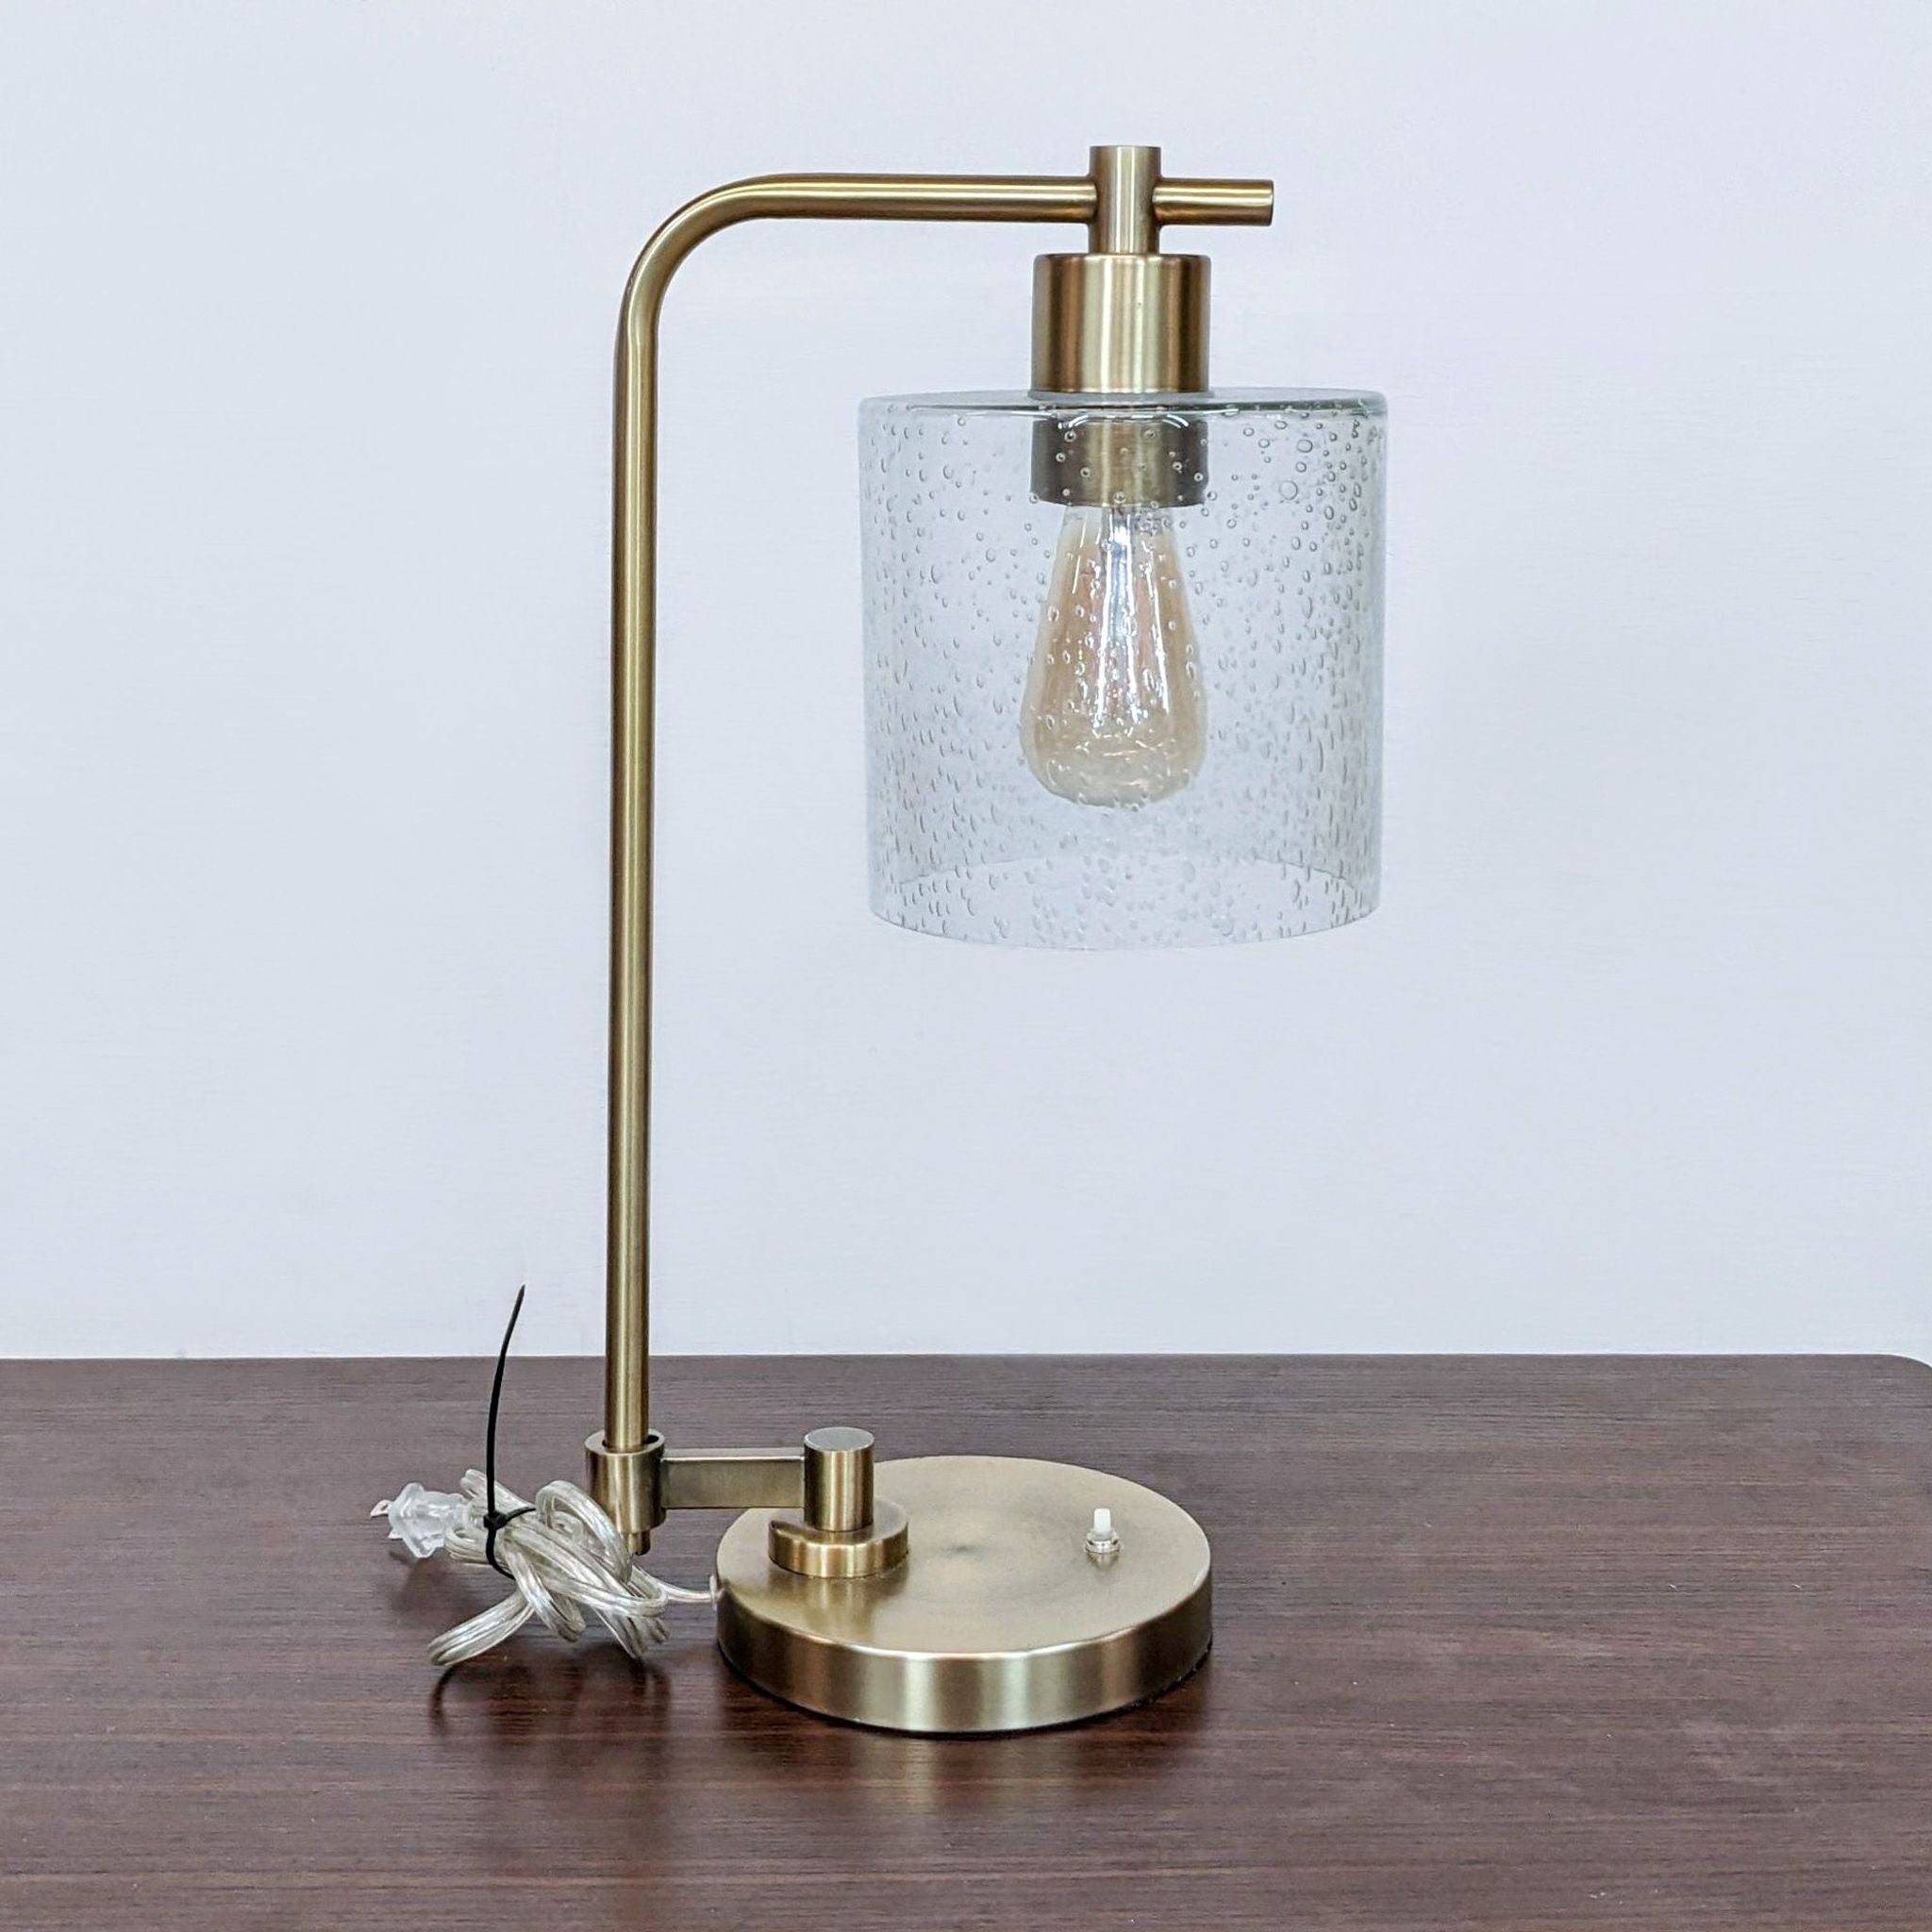 Reperch brand table lamp with a golden base and a clear glass shade with raindrop design on a wooden surface.